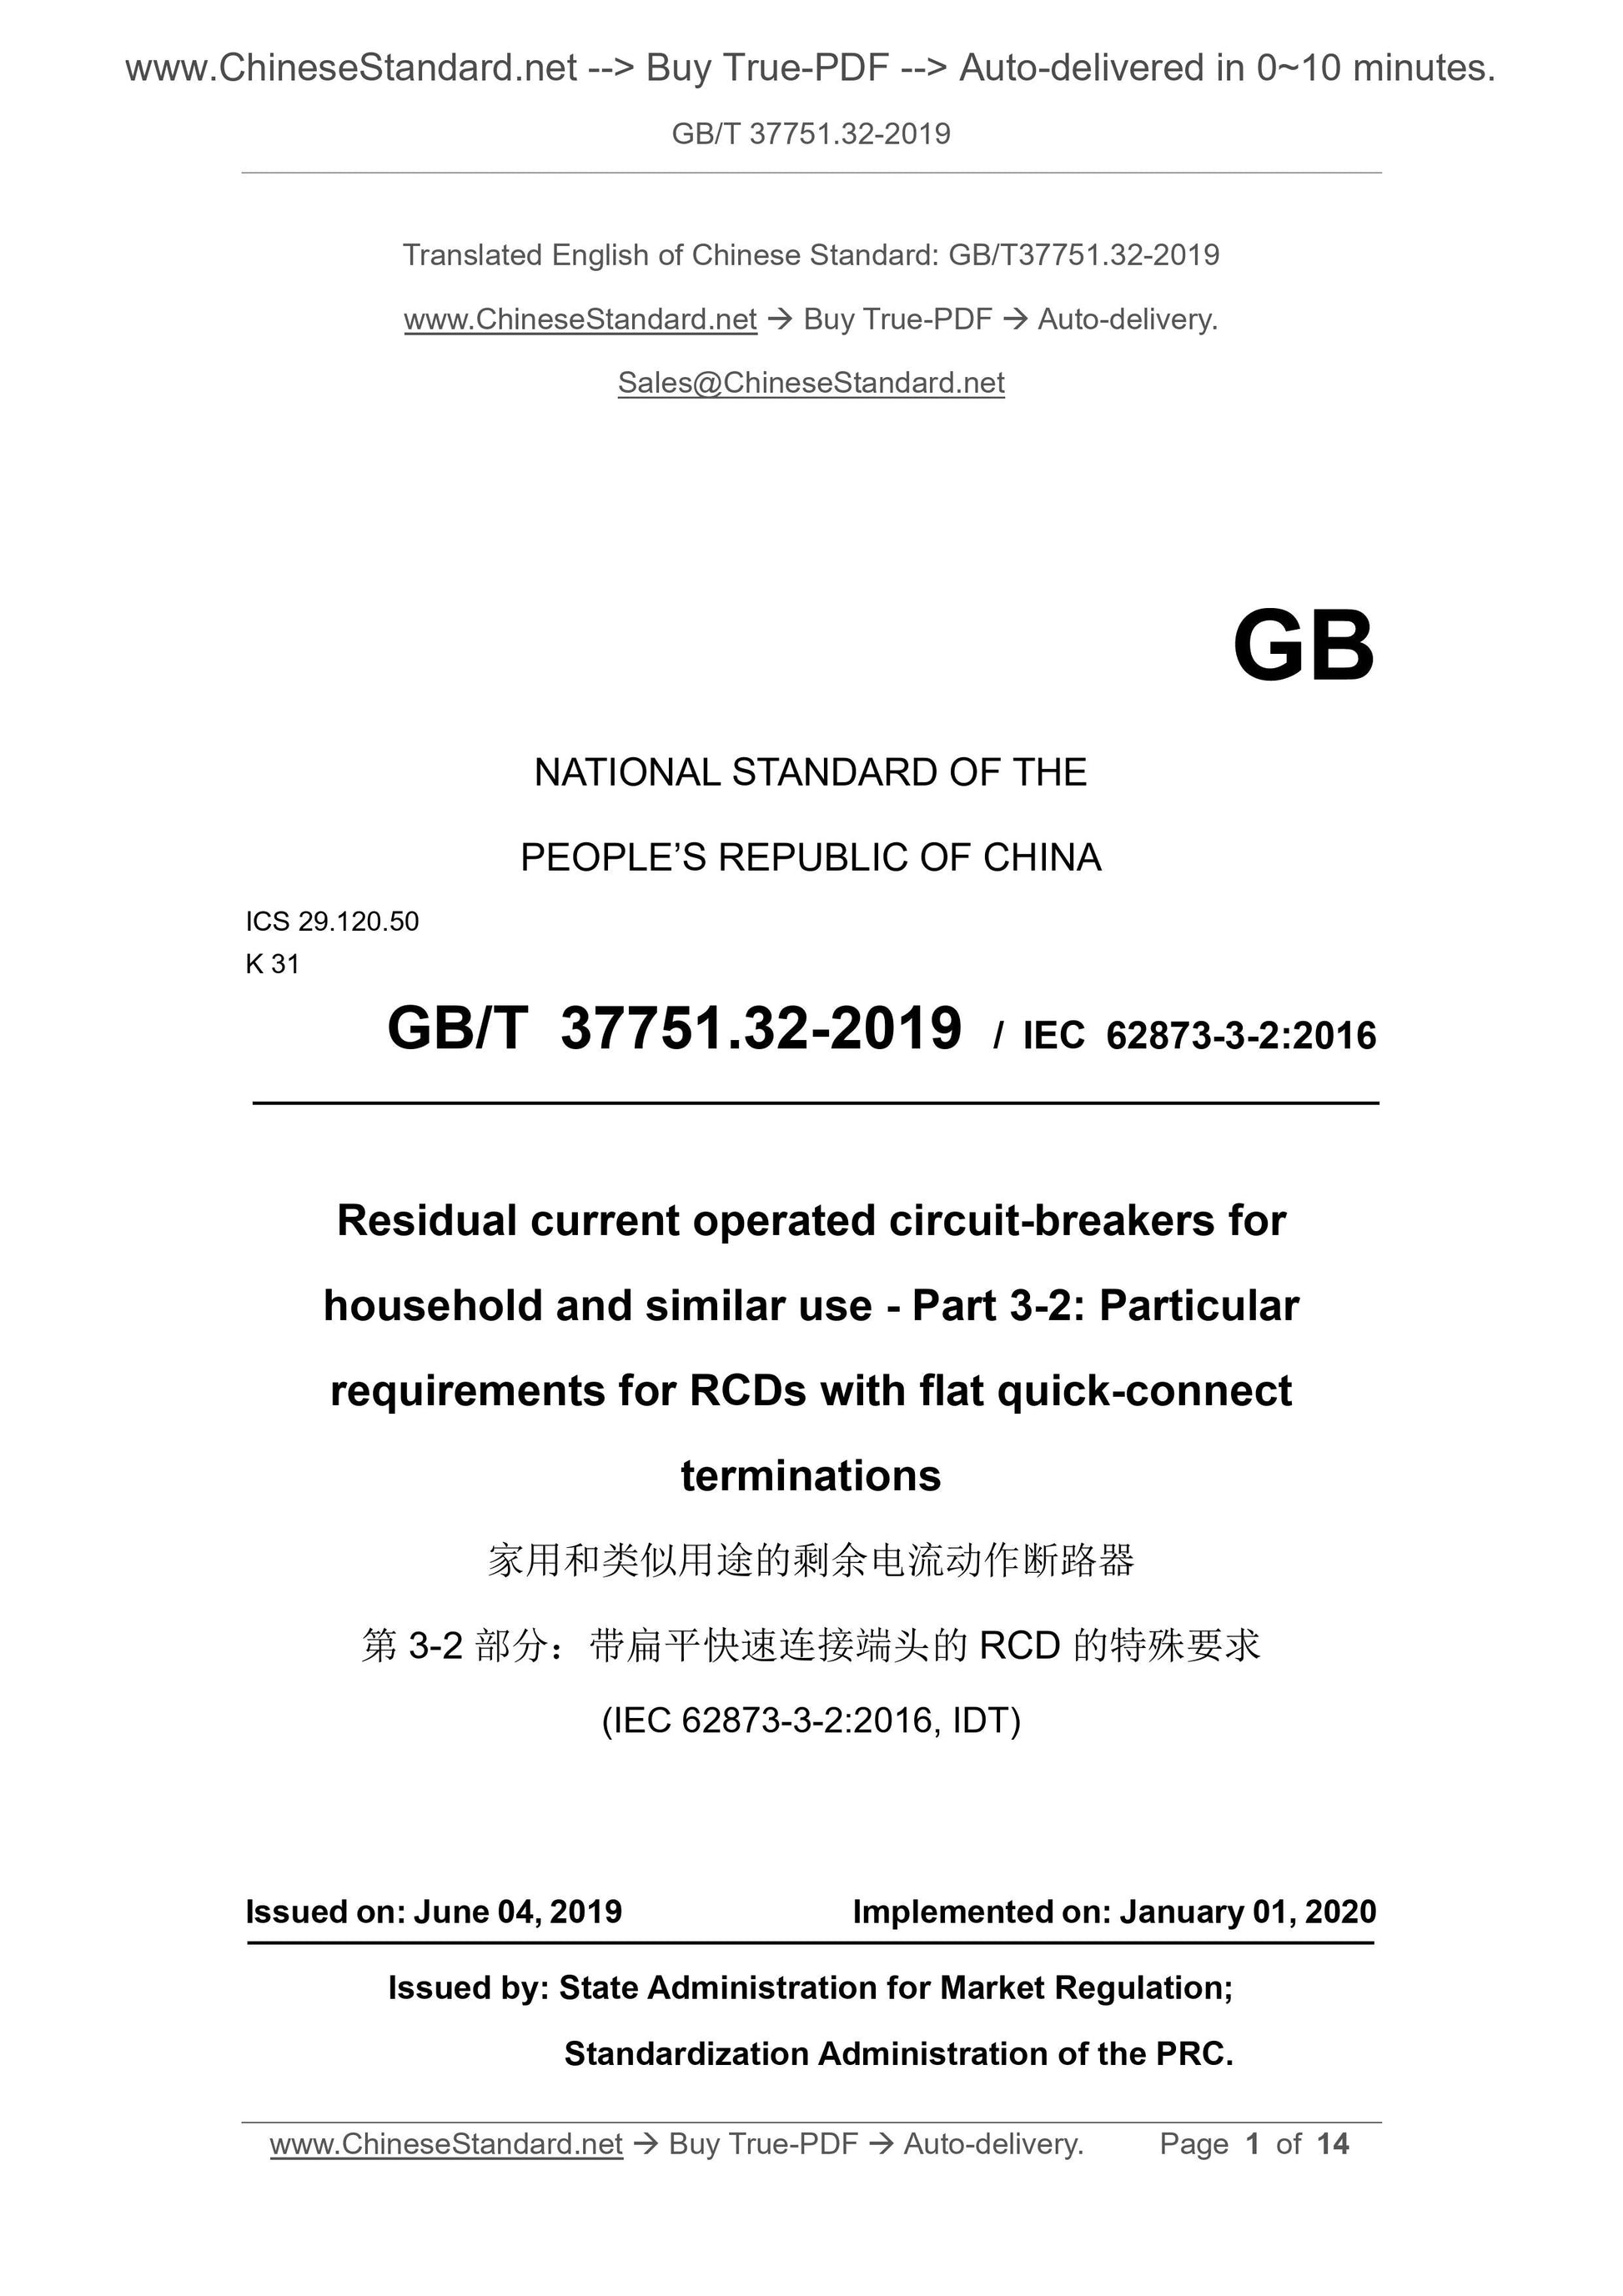 GB/T 37751.32-2019 Page 1